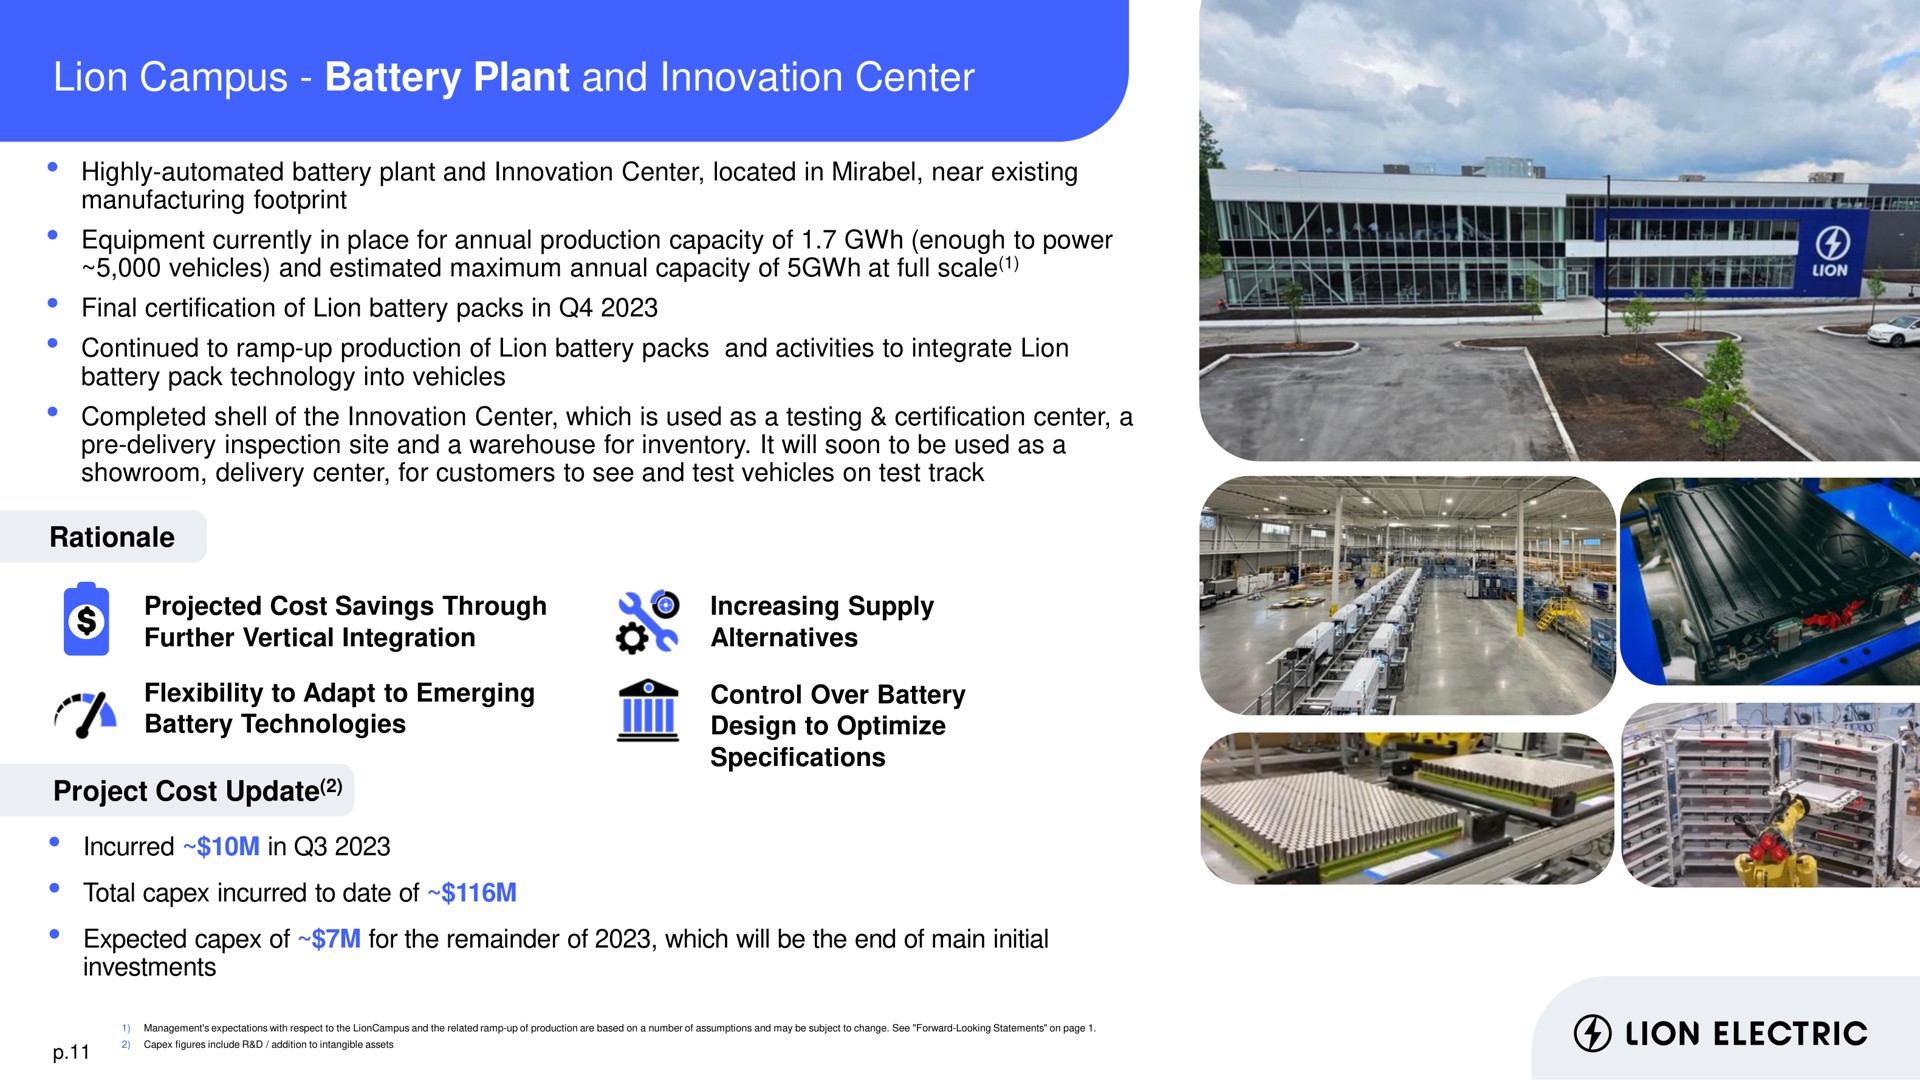 lion campus battery plant and innovation center vehicles estimated maximum annual capacity of at full scale project cost update control over electric | Lion Electric